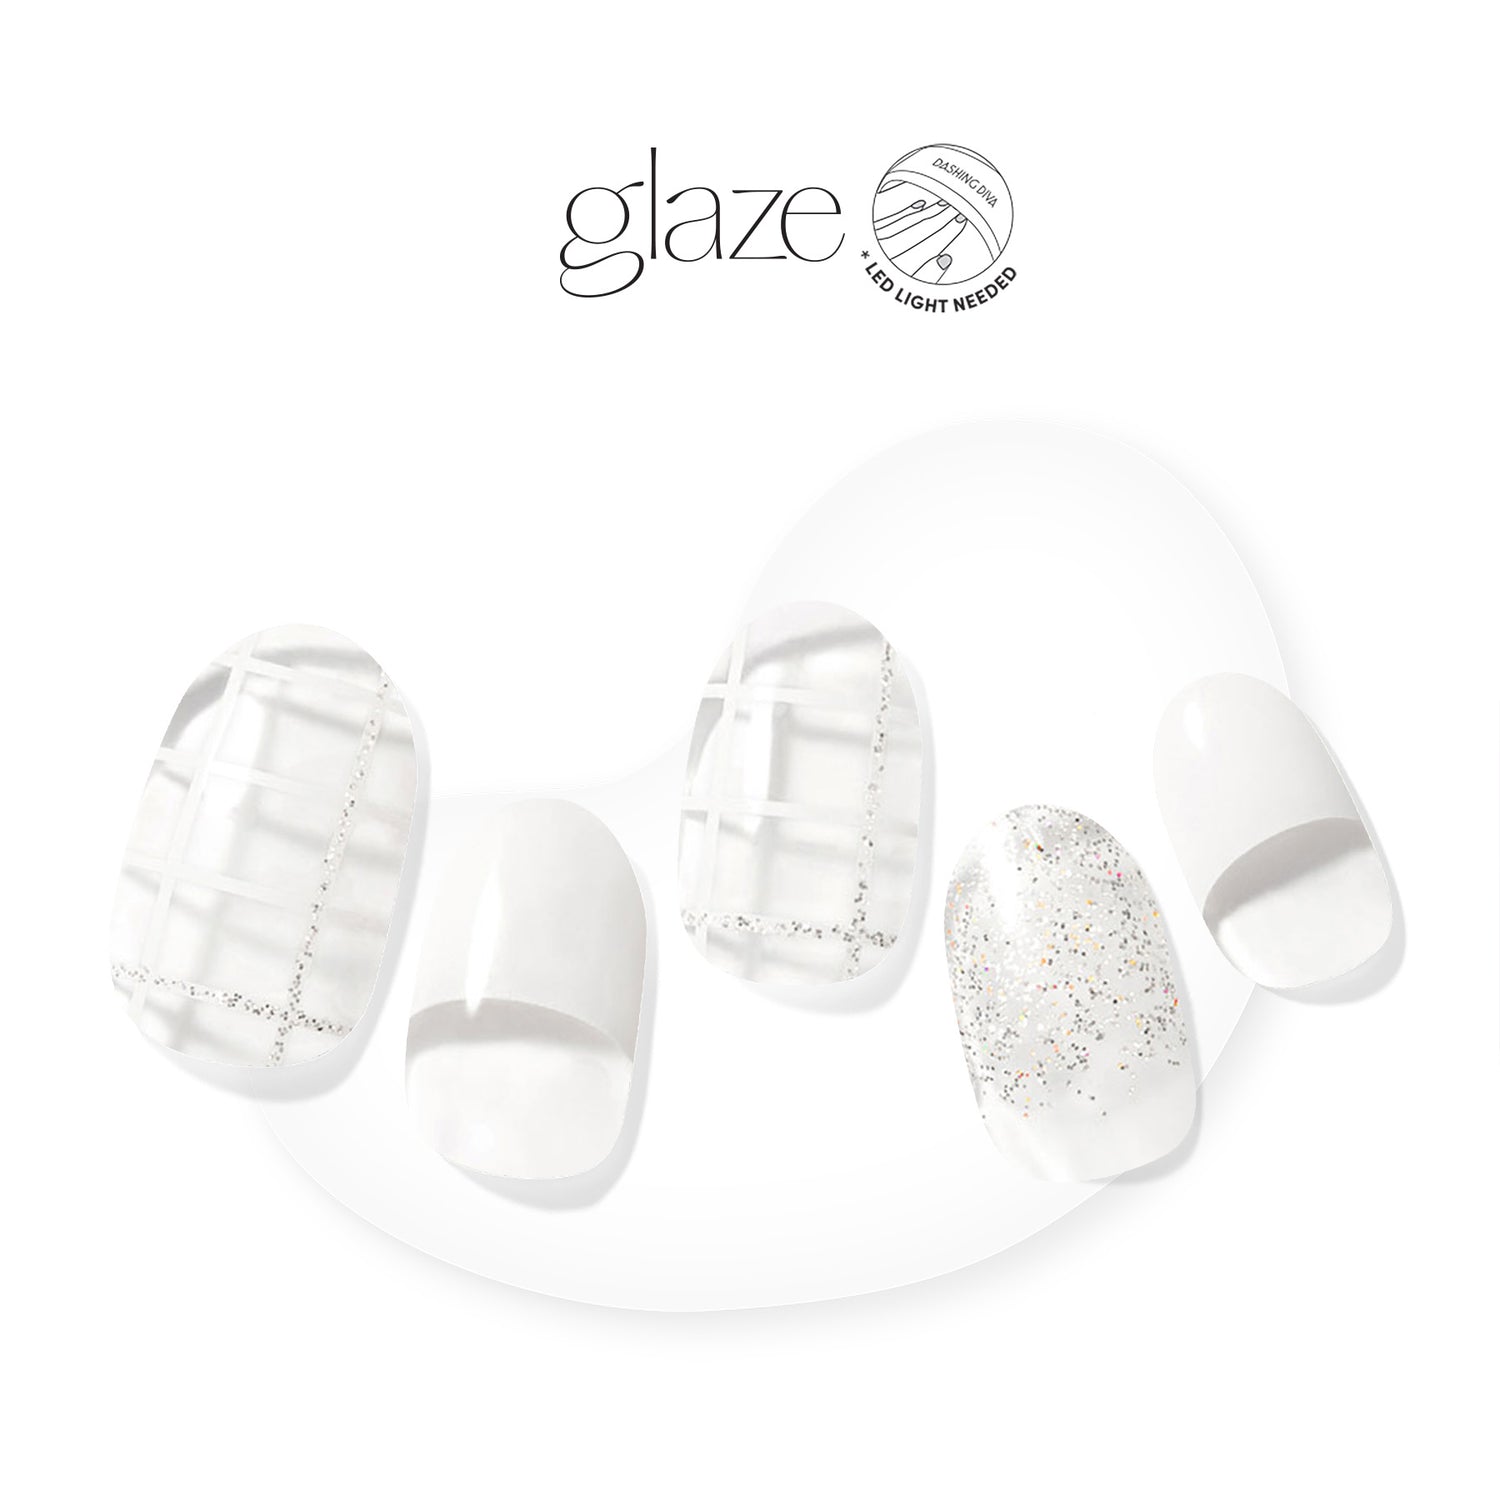 Dashing Diva GLAZE negative space white semi cured gel nail strips with geometric lines, non traditional French tips and glitter accents.